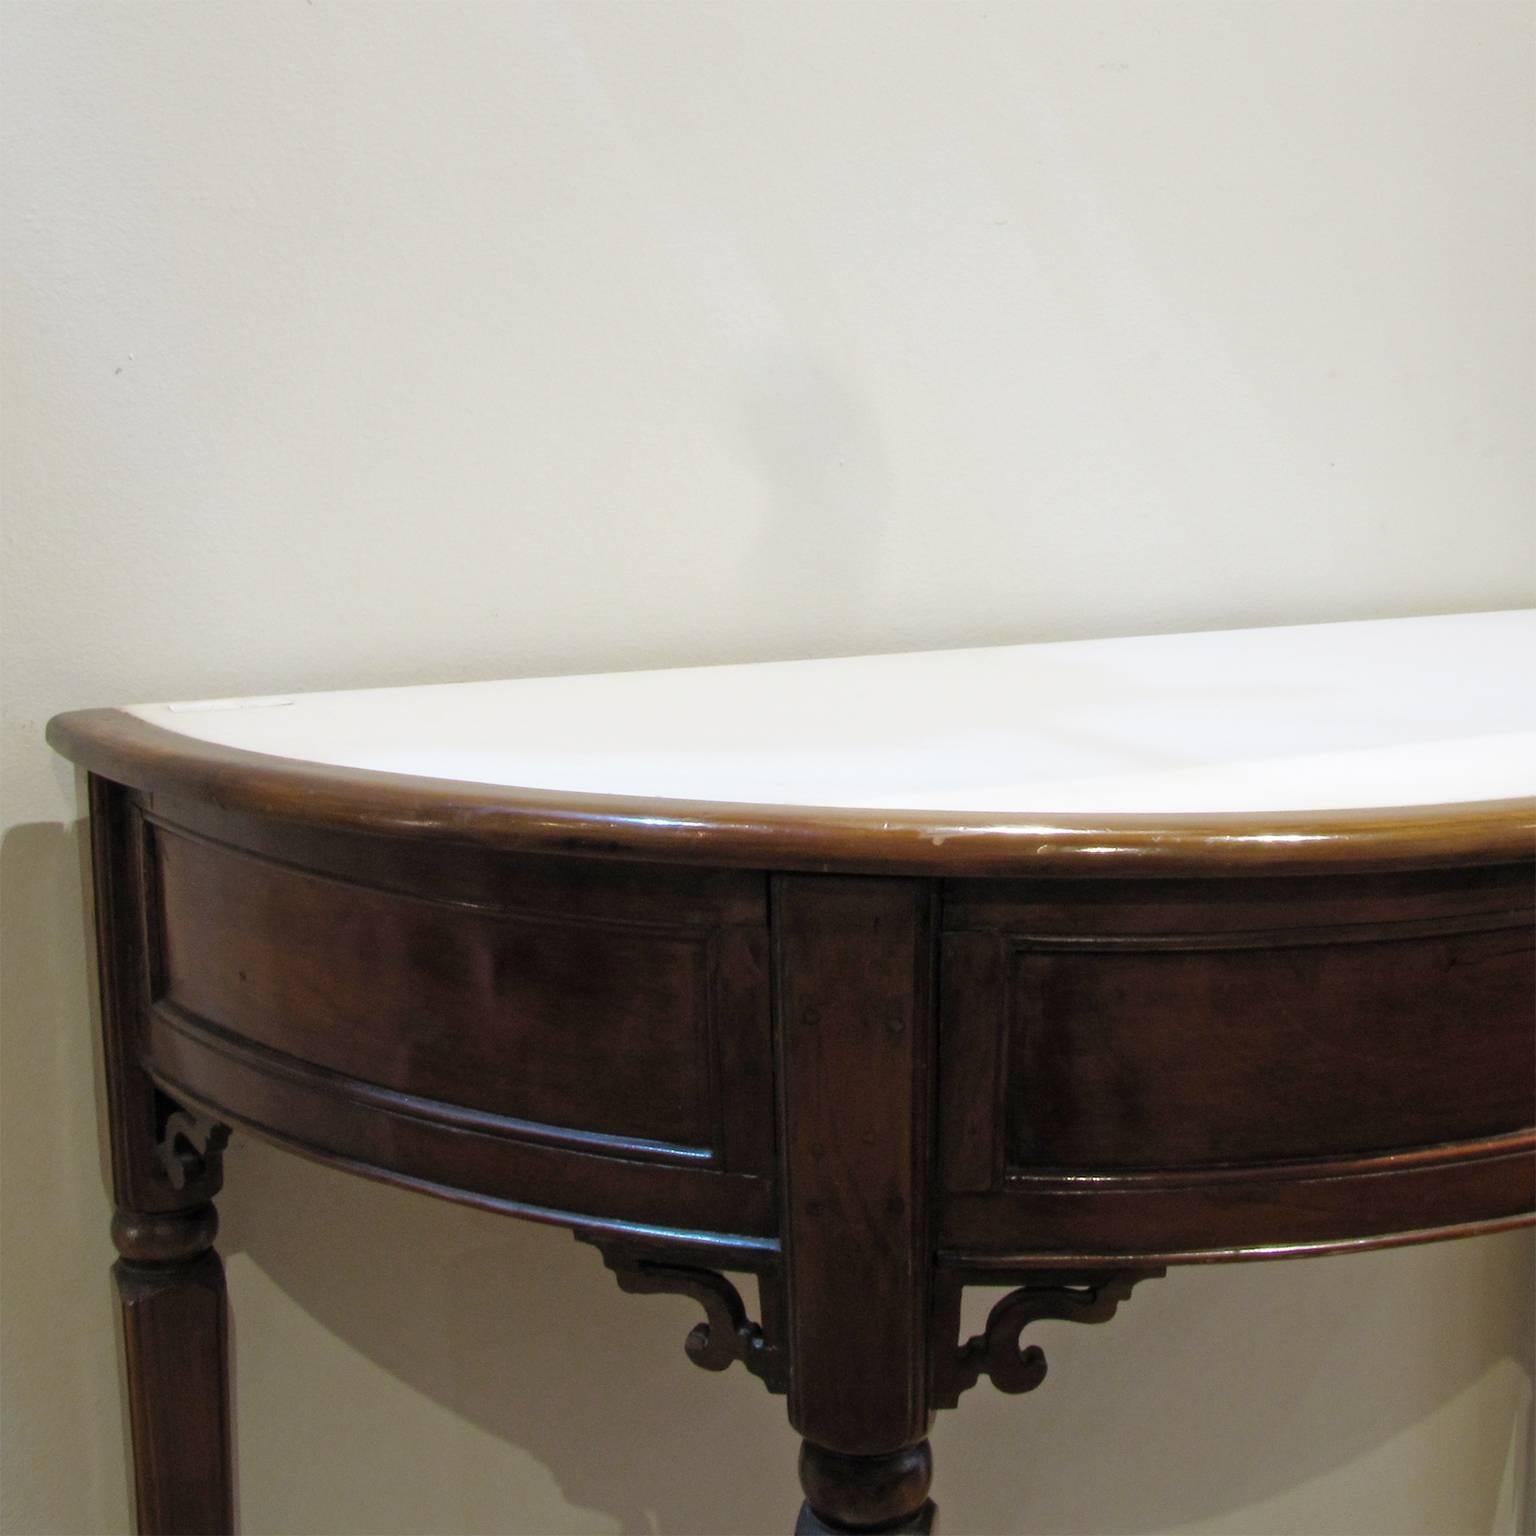 Two Italian Mid-19th Century Side Tables in Mahogany Wood with White Marble Top For Sale 2